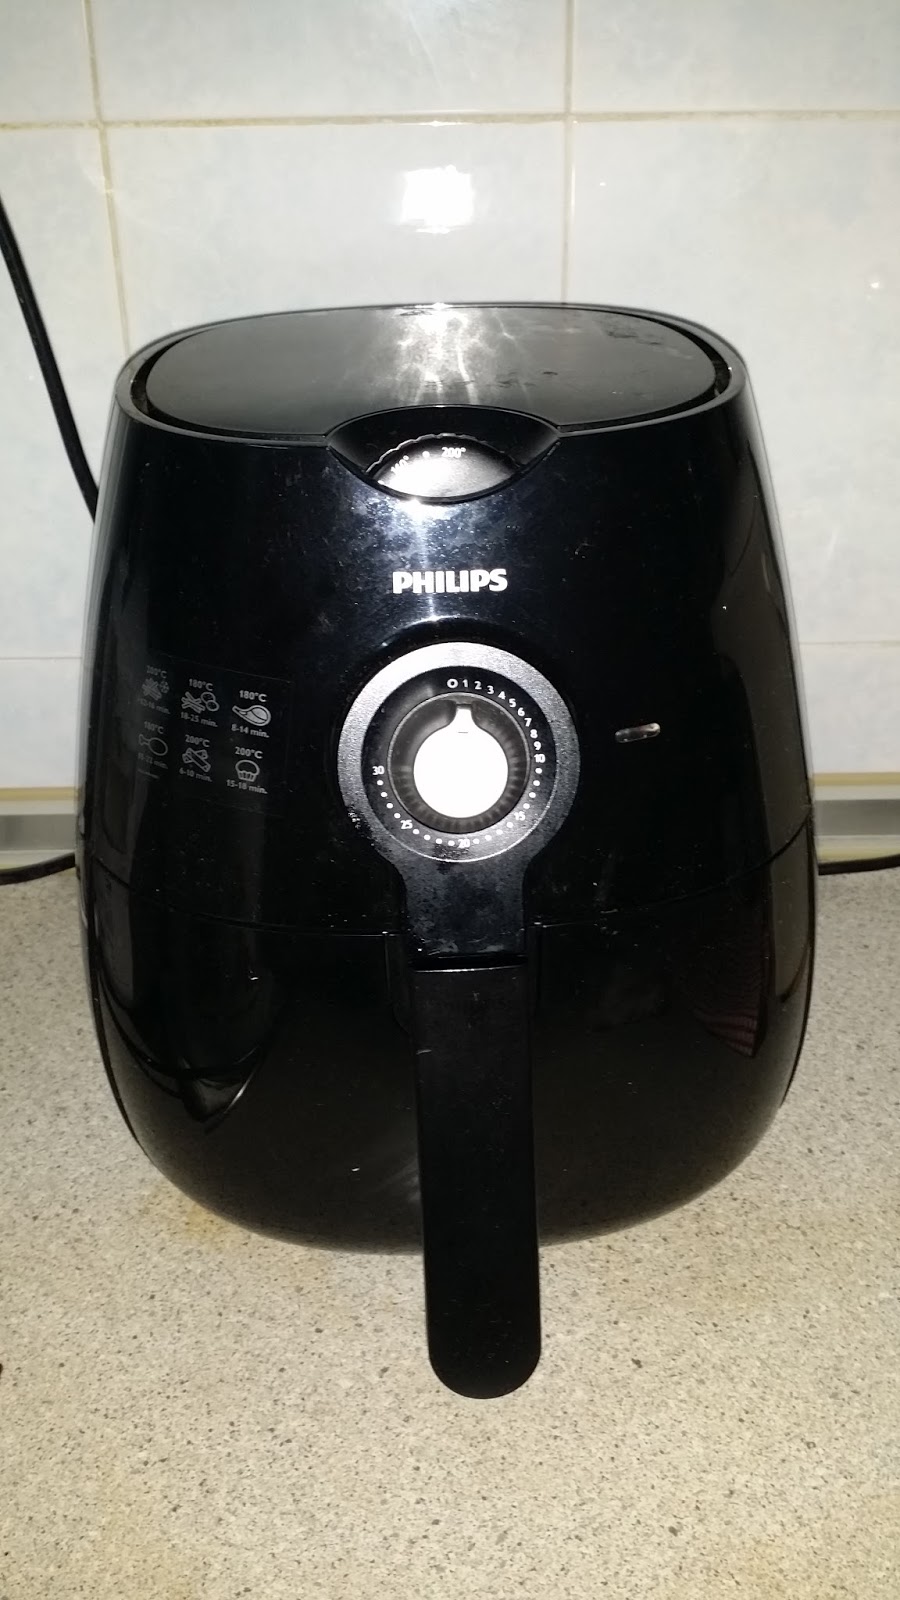 Sharon and her adventures...: Very Bad Experience with Air Fryer HD9220 - Will it Cause Cancer?